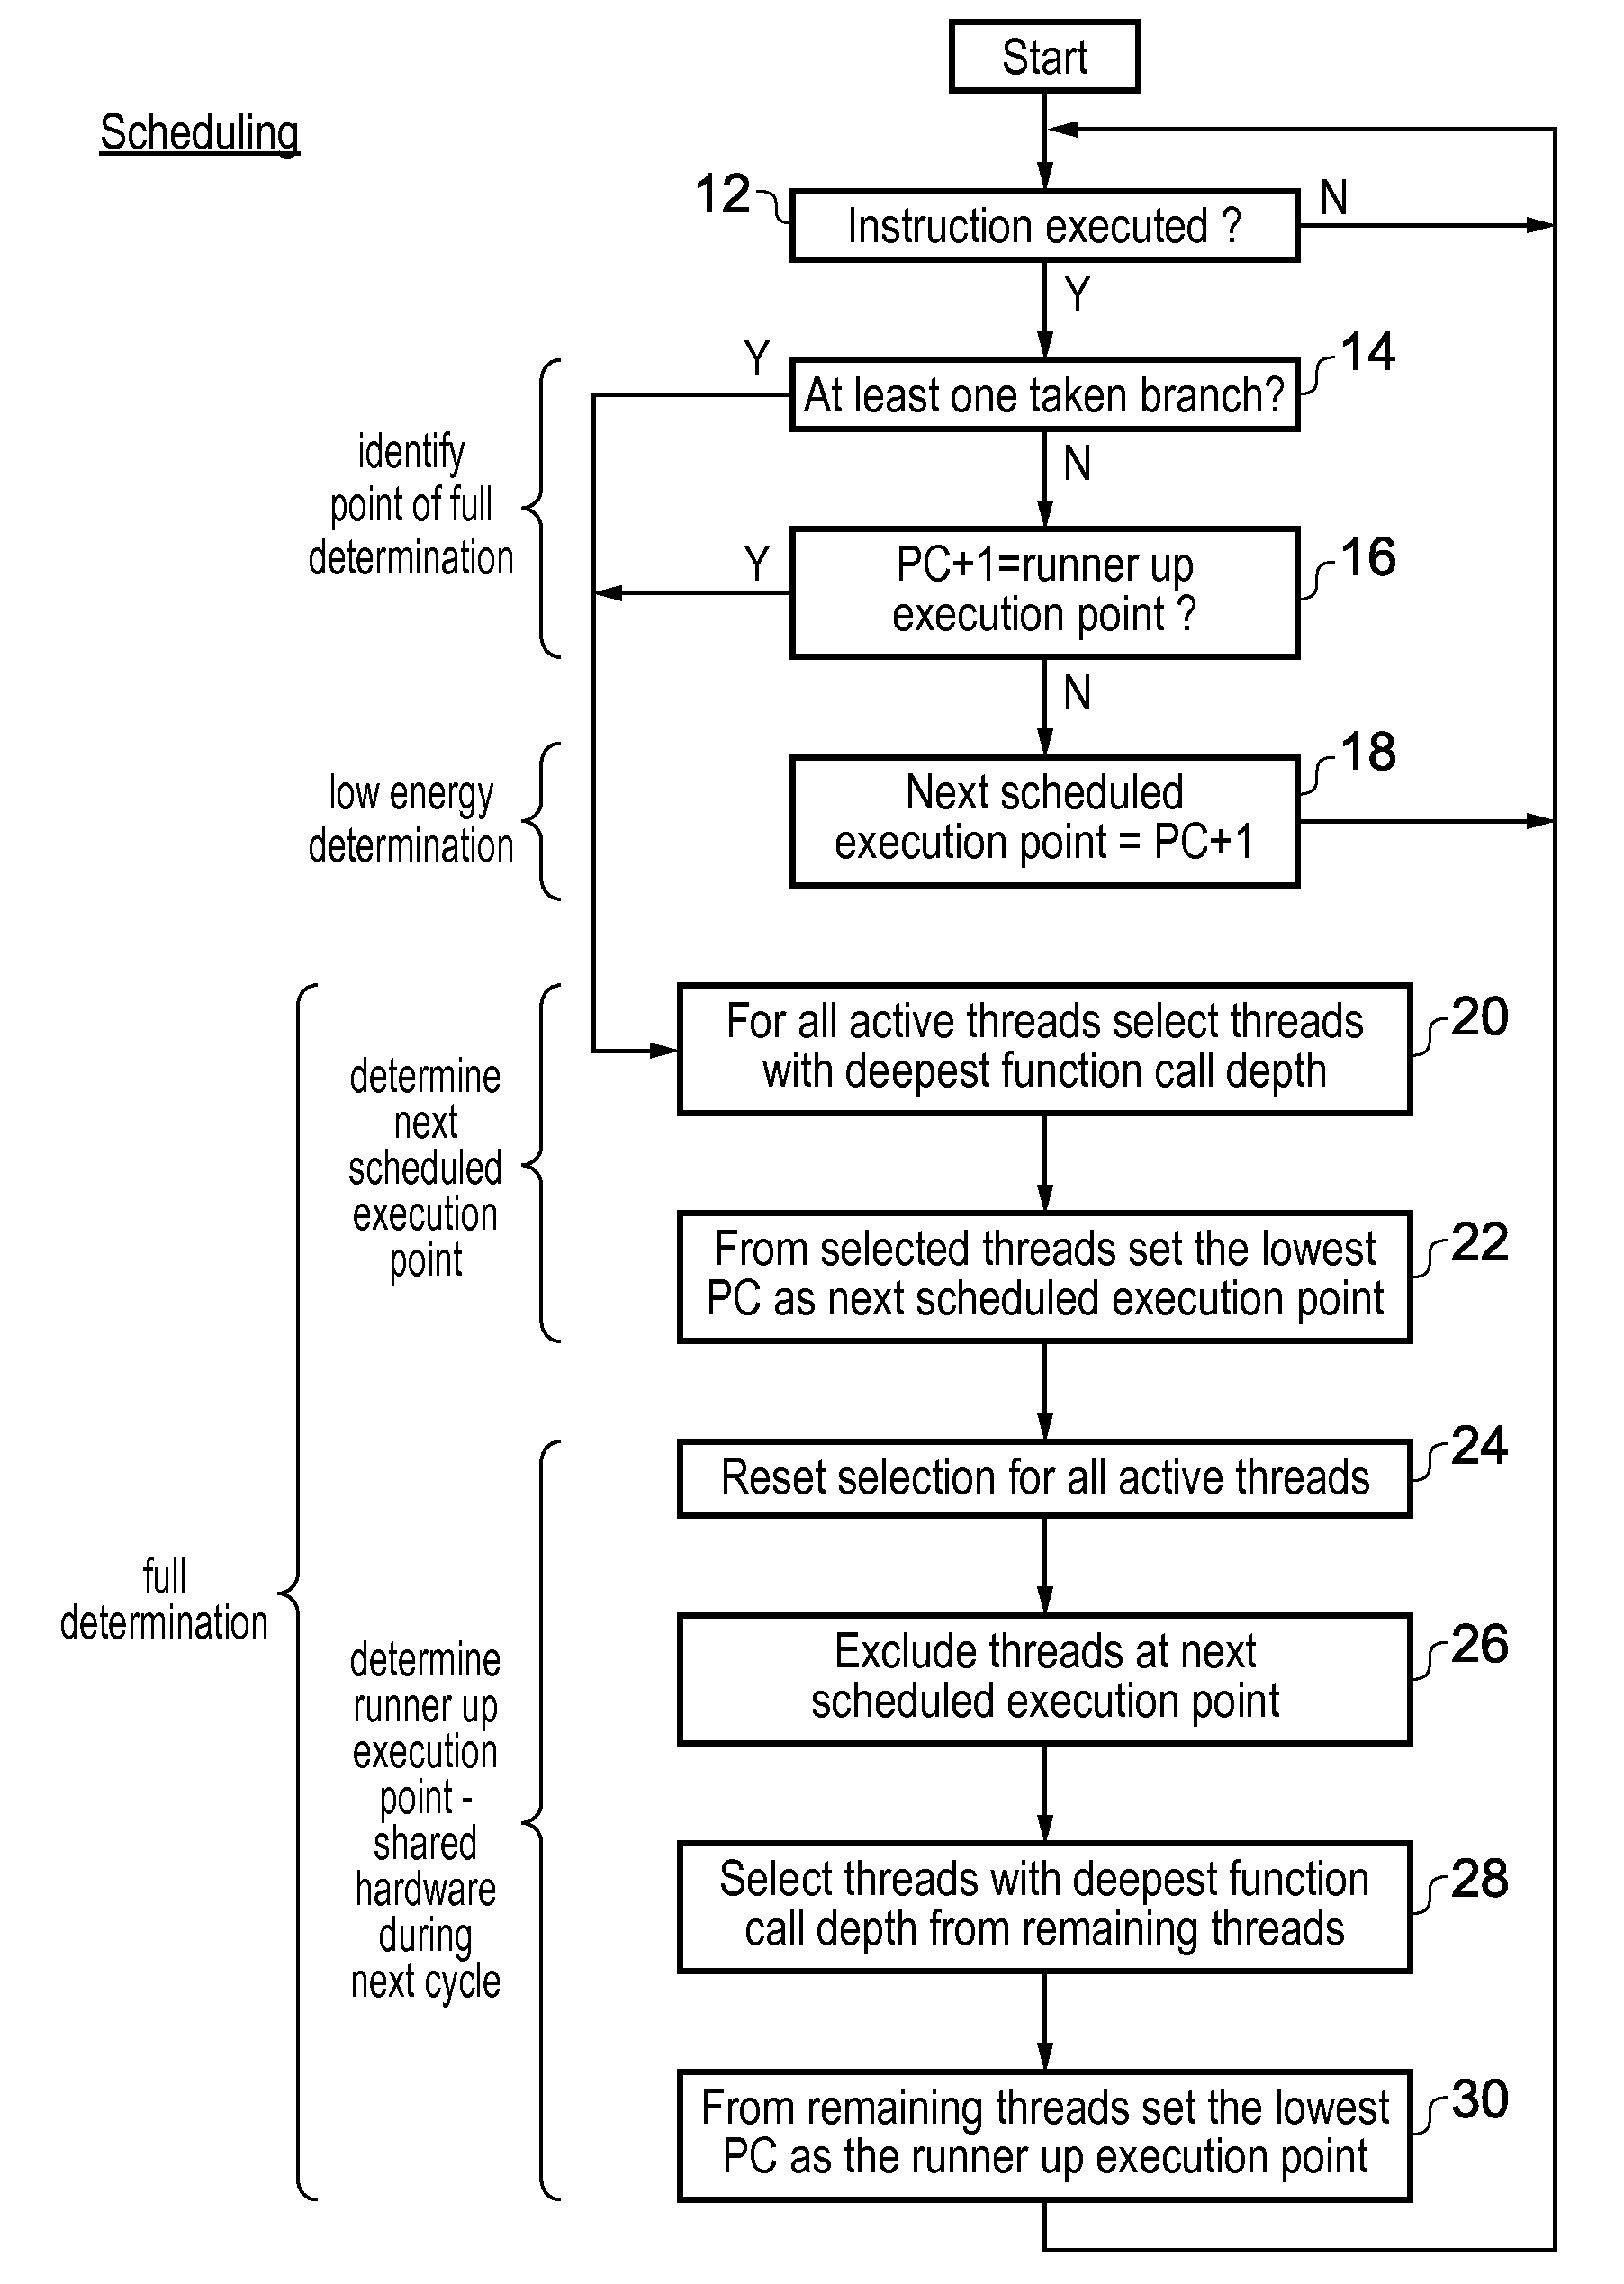 Scheduling program instructions with a runner-up execution position